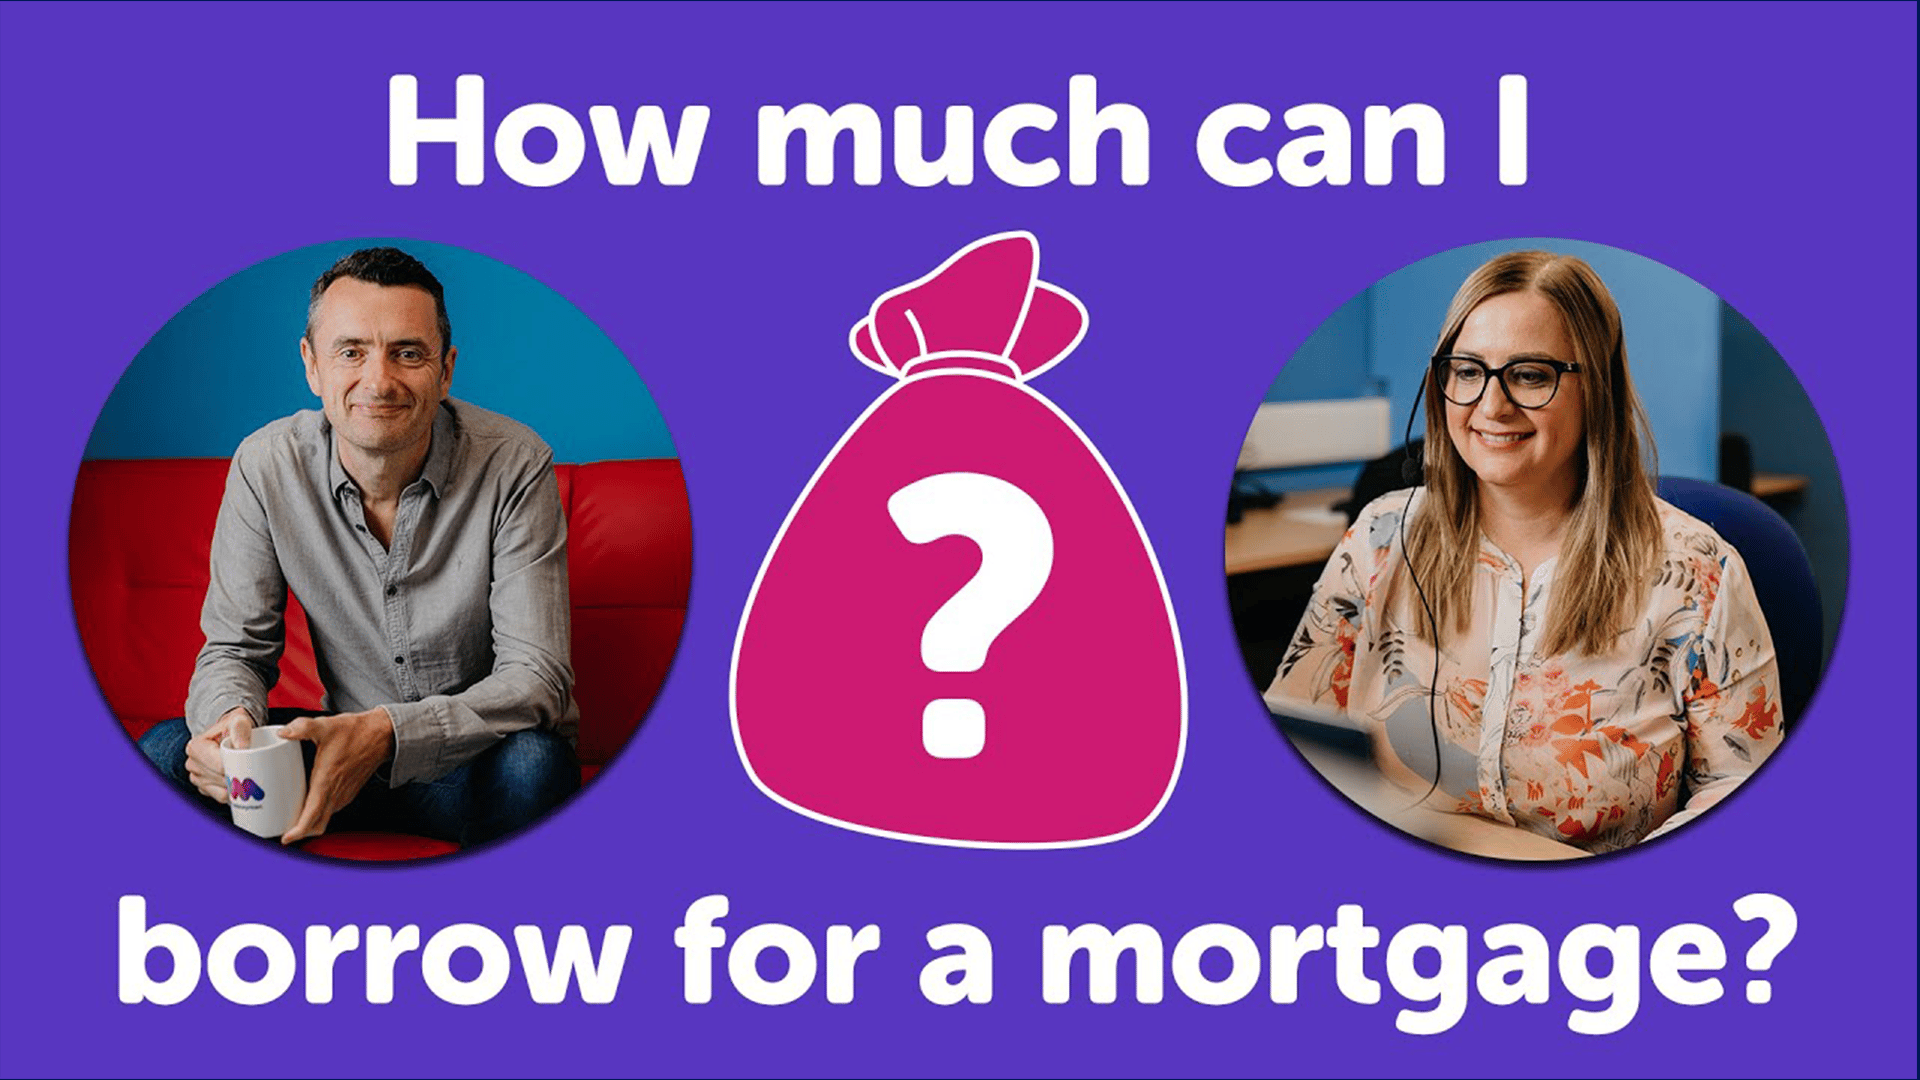 How Much Can I Borrow for A Mortgage in London? Then Versus Now